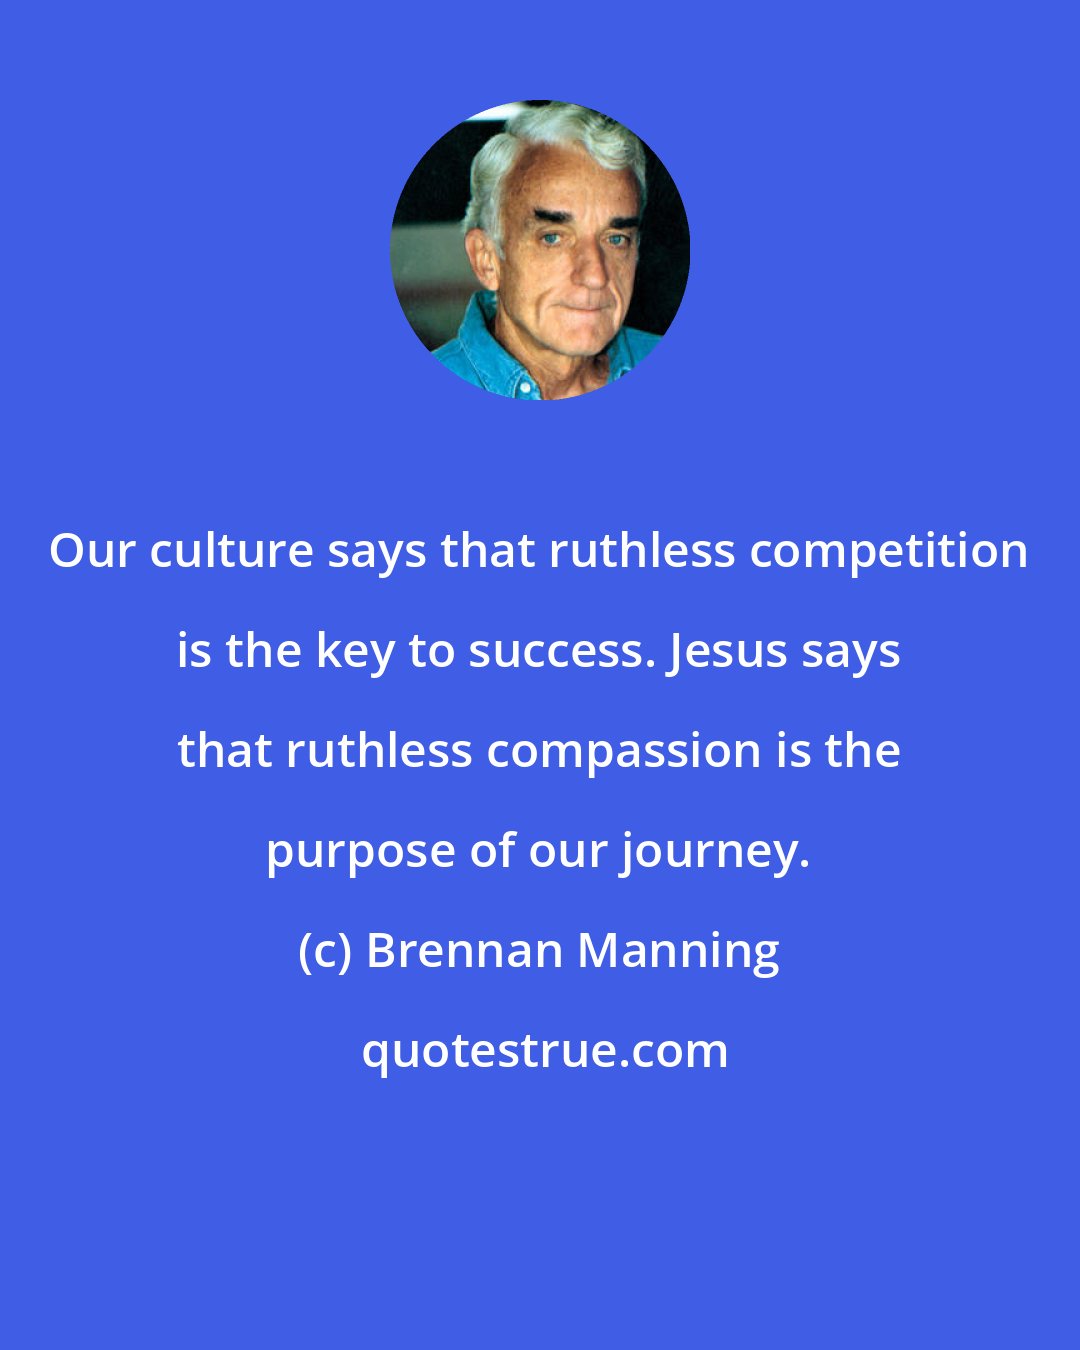 Brennan Manning: Our culture says that ruthless competition is the key to success. Jesus says that ruthless compassion is the purpose of our journey.